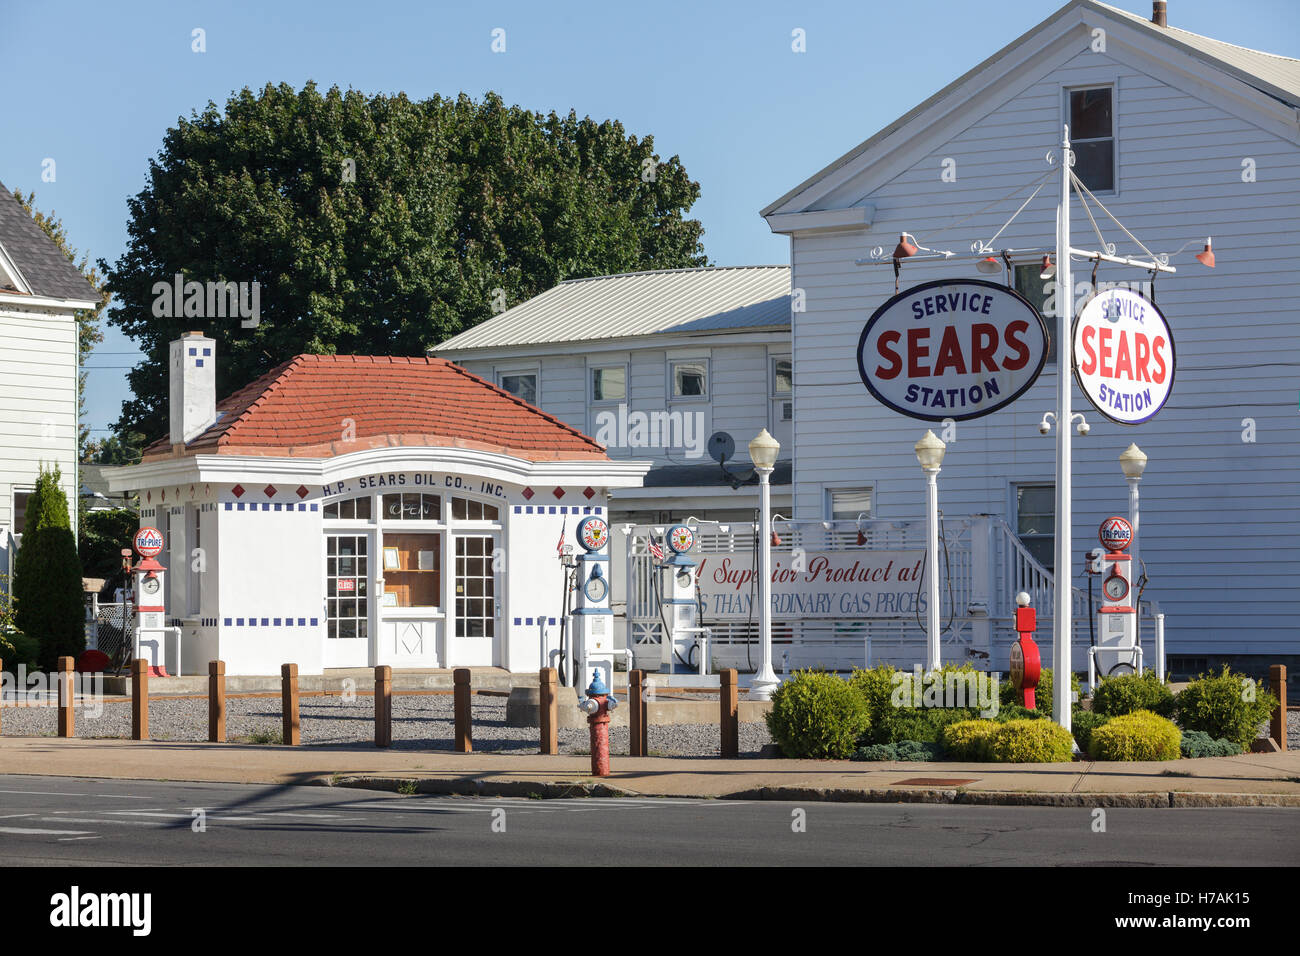 H. P. Sears Oil Co. Service Station Museum, Rom, New York, USA. Stockfoto